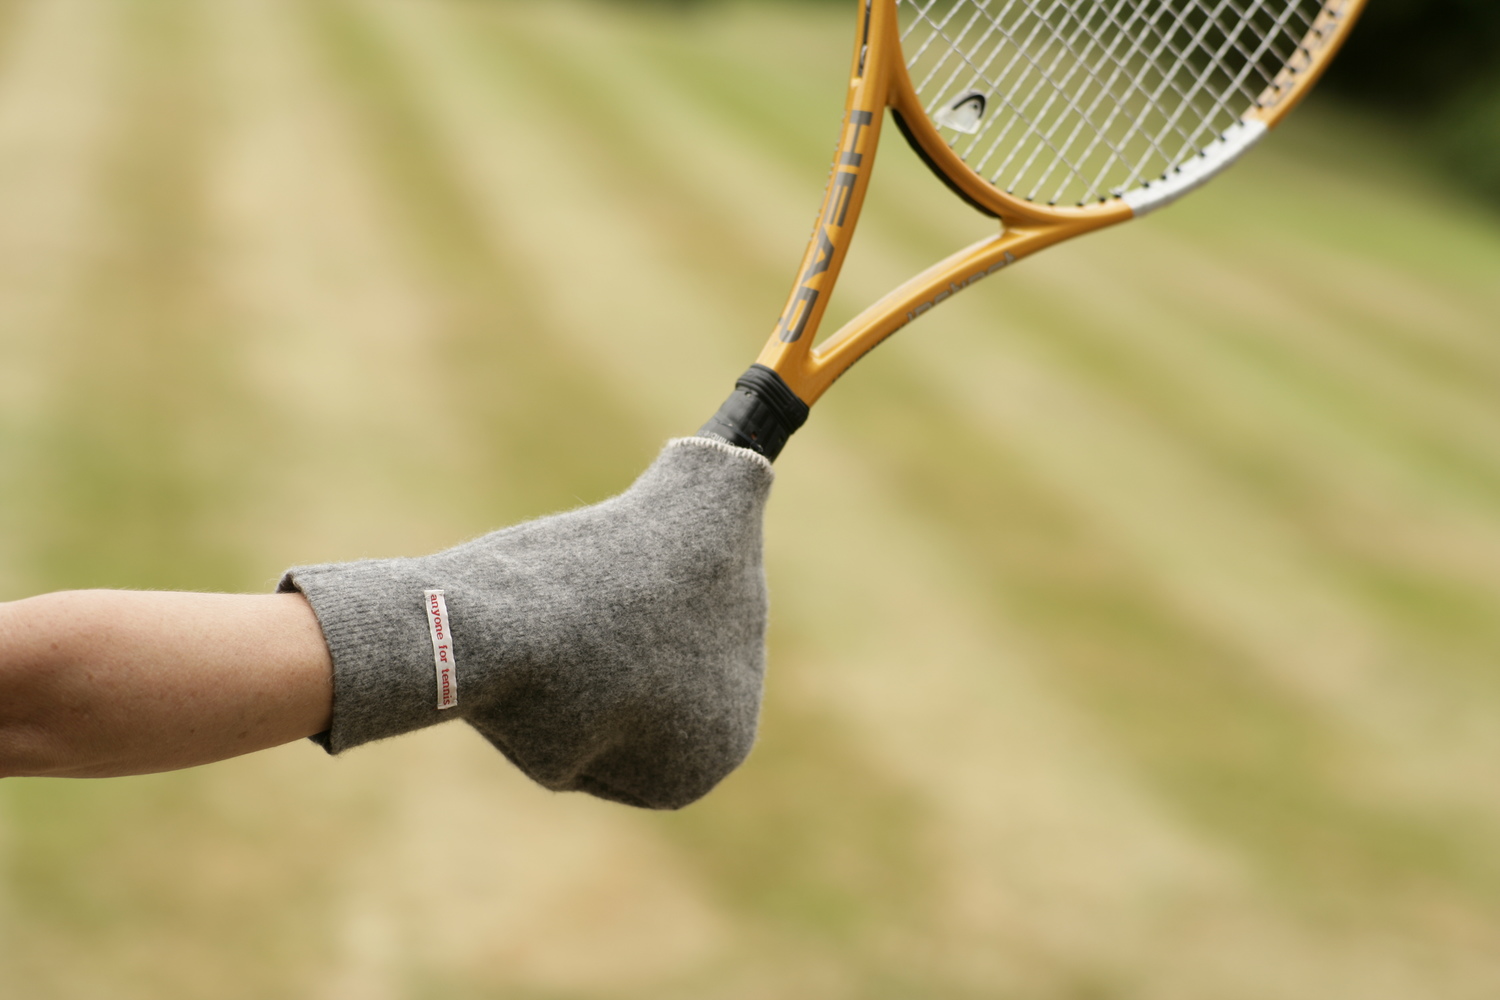 Tennis gloves — What The Blazers